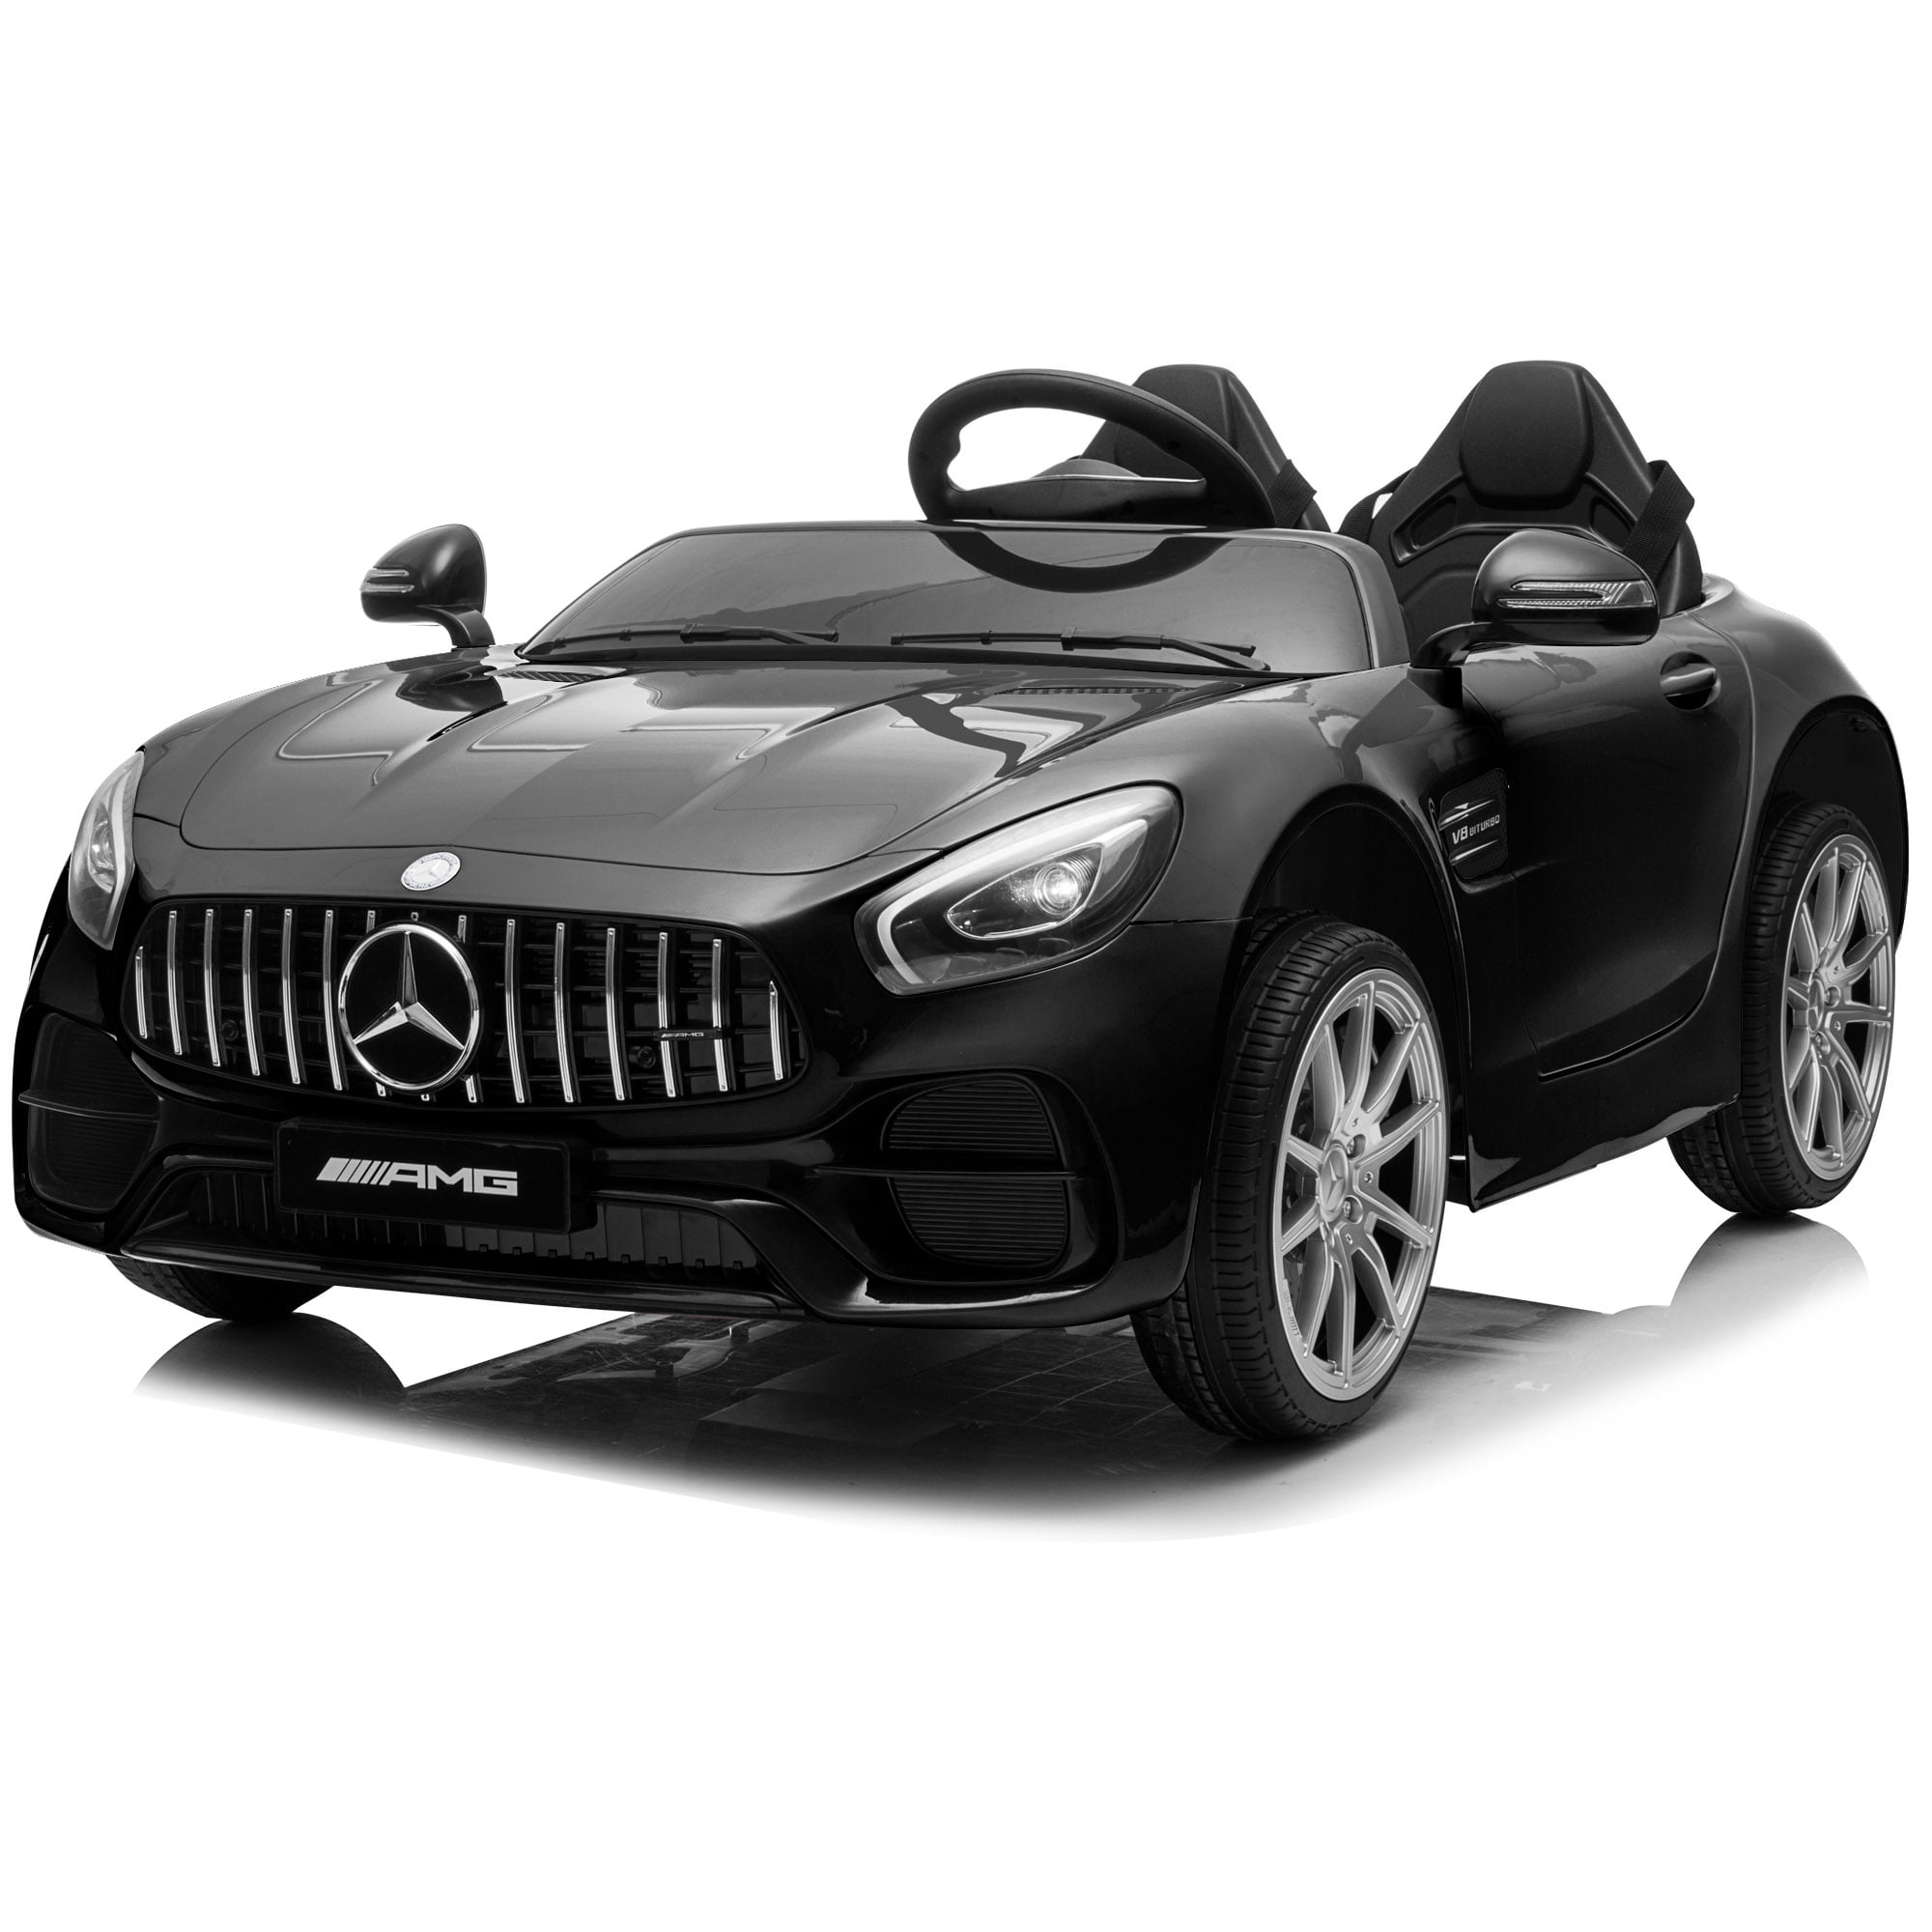 Kidzone 12V 2 Seats Licensed Mercedes-Benz AMG GT Kids Ride On Car Electric Powered Vehicle Parental Remote Control, 4 Colors Available